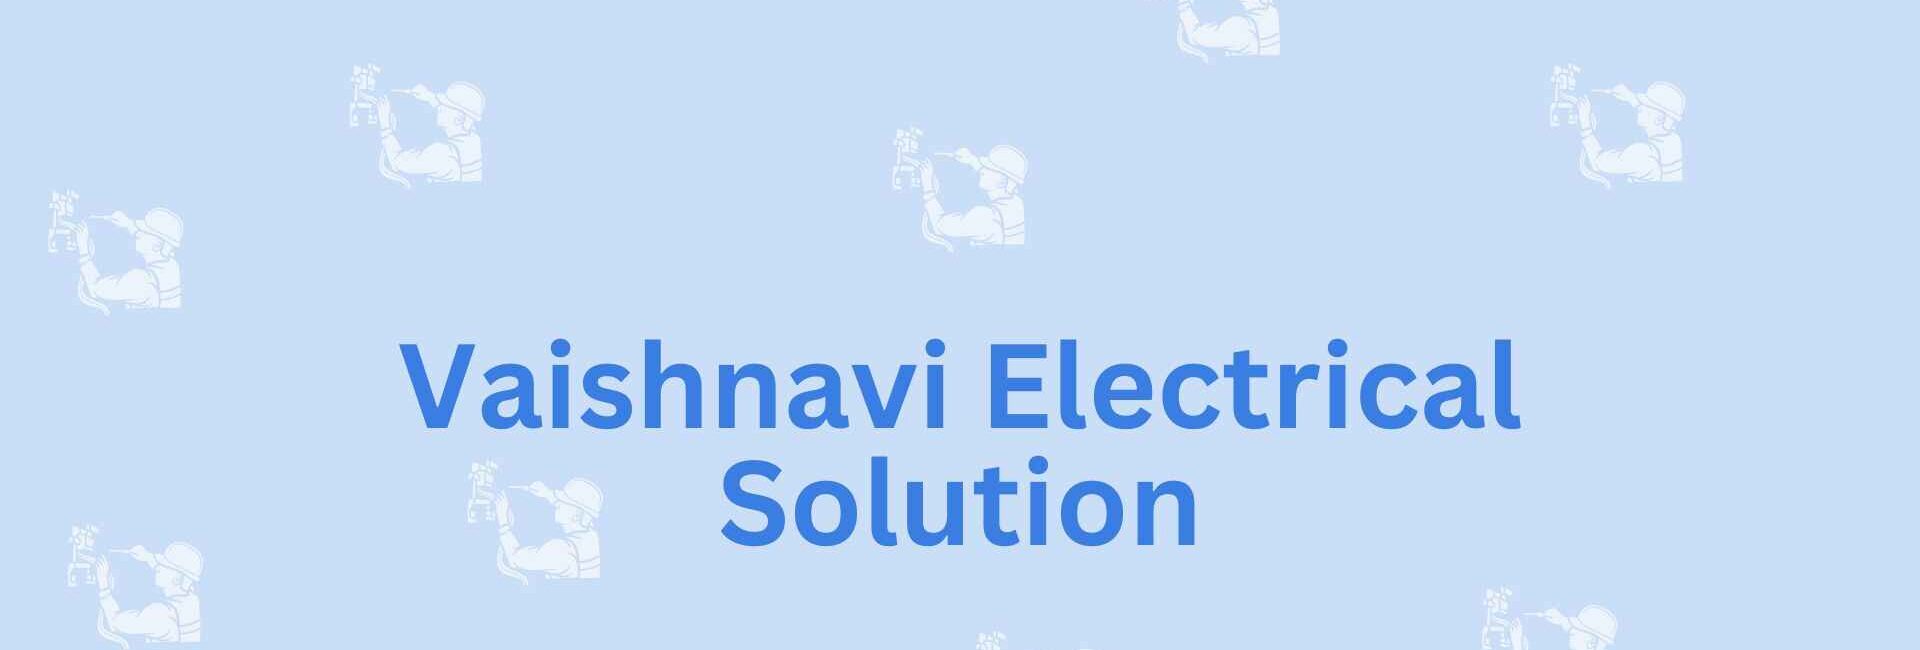 Vaishnavi Electrical Solution- Electricity Repair Services In Noida